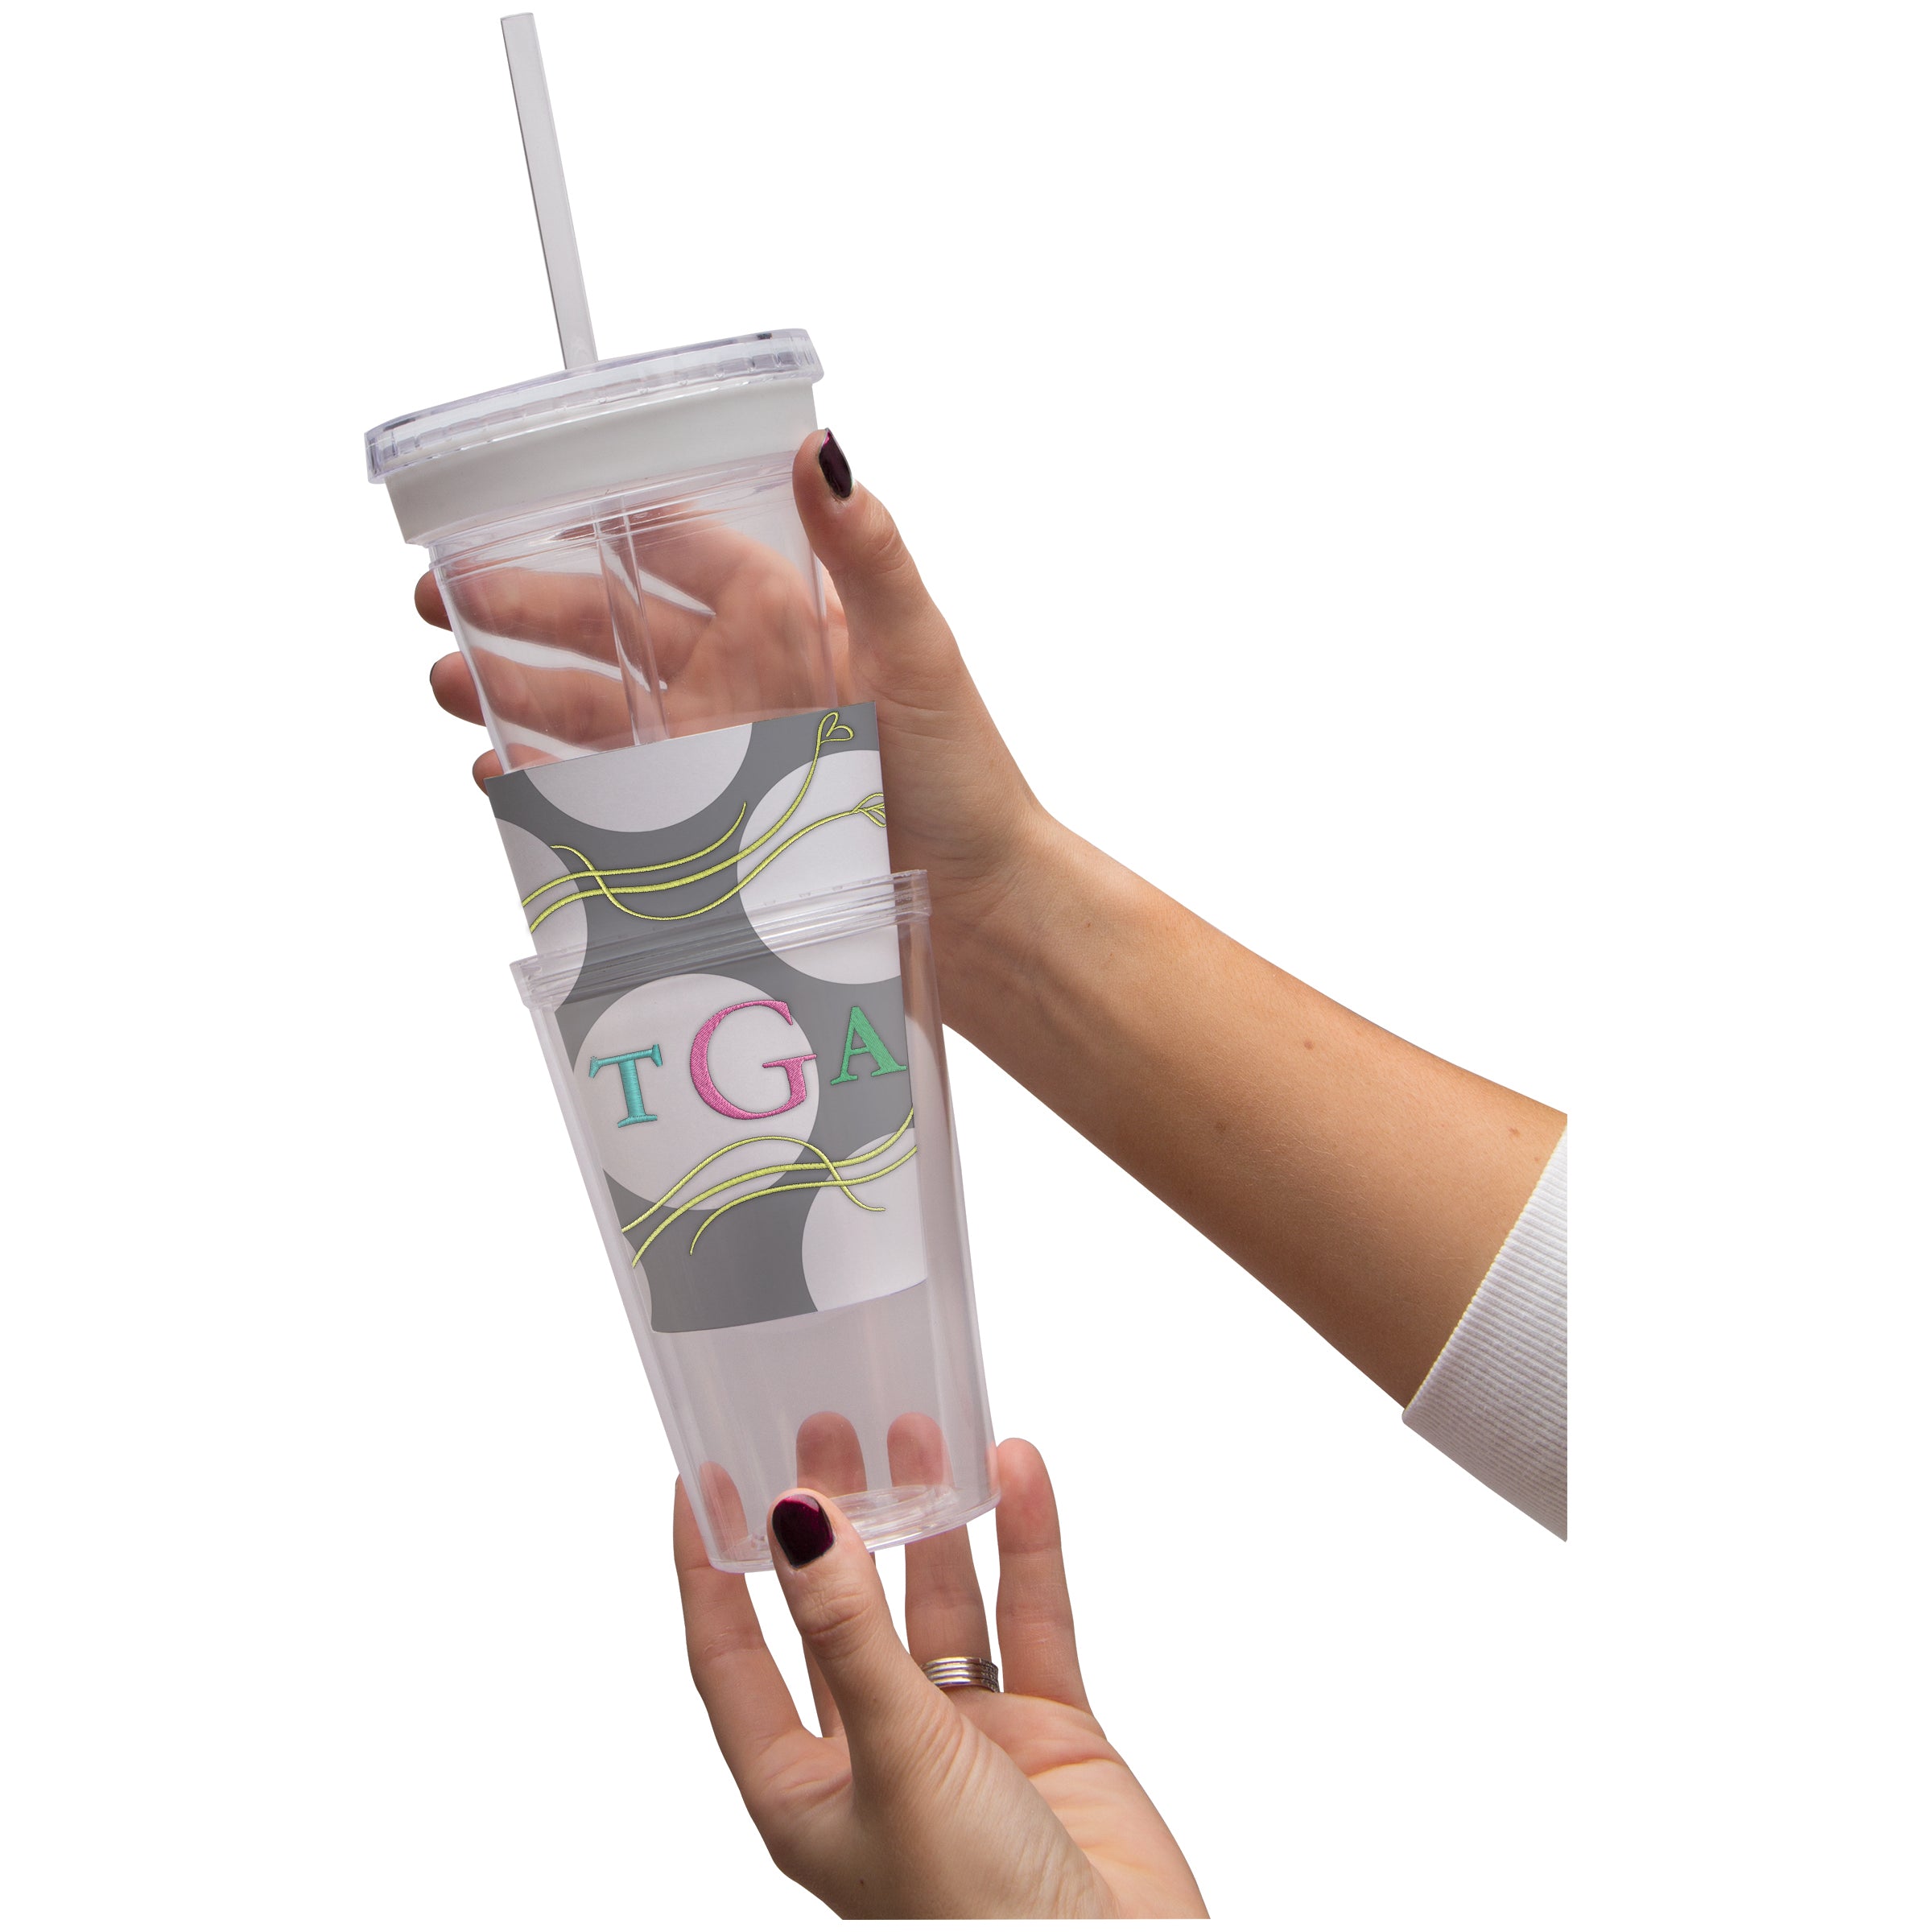 16 oz. Acrylic Tumbler with Straw  INSERTS FROM TOP